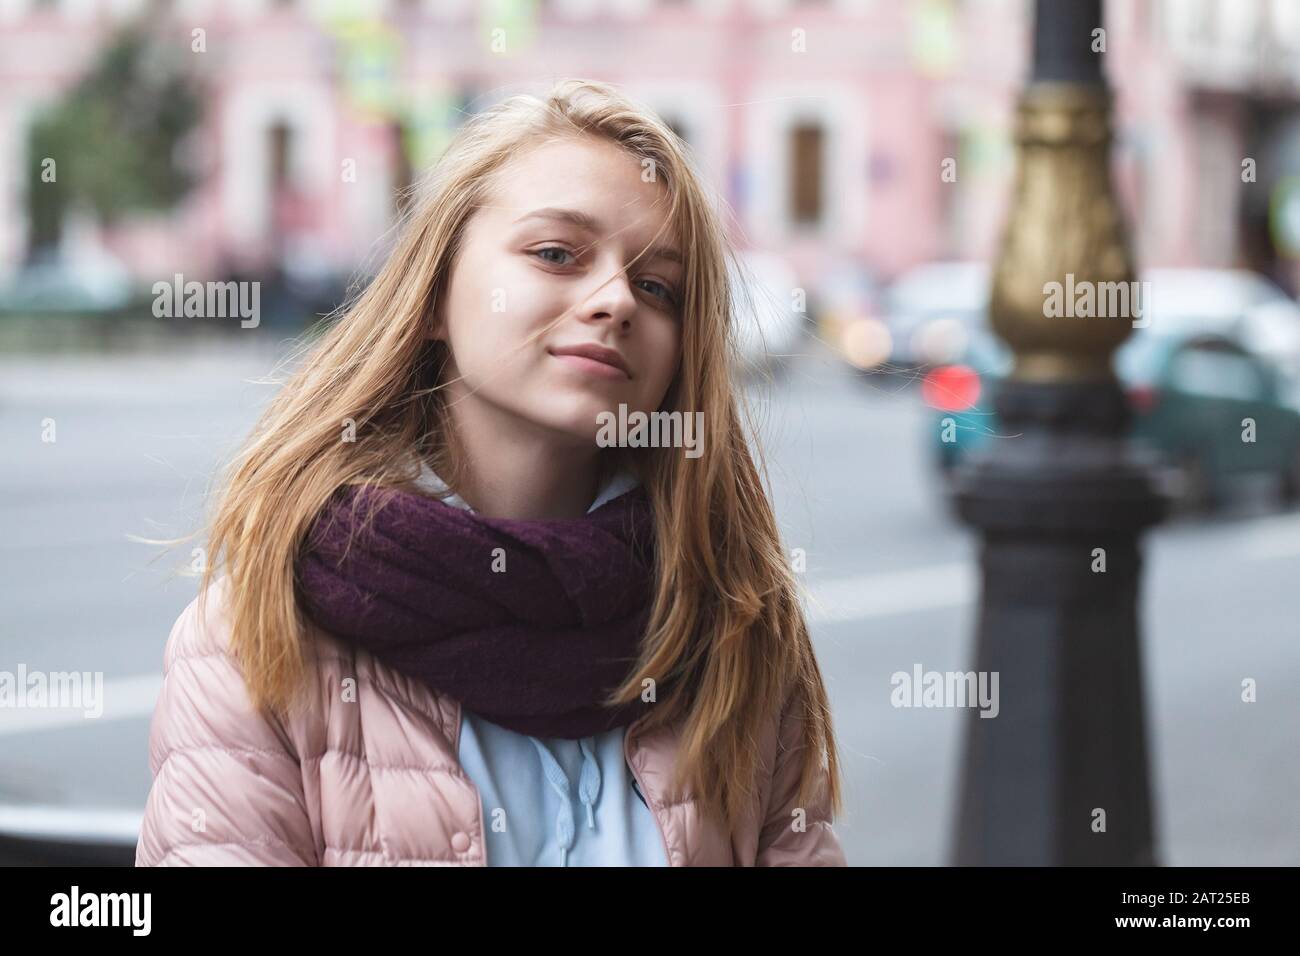 Pretty blond teenage girl on an urban walk, close up outdoor portrait, casual style Stock Photo